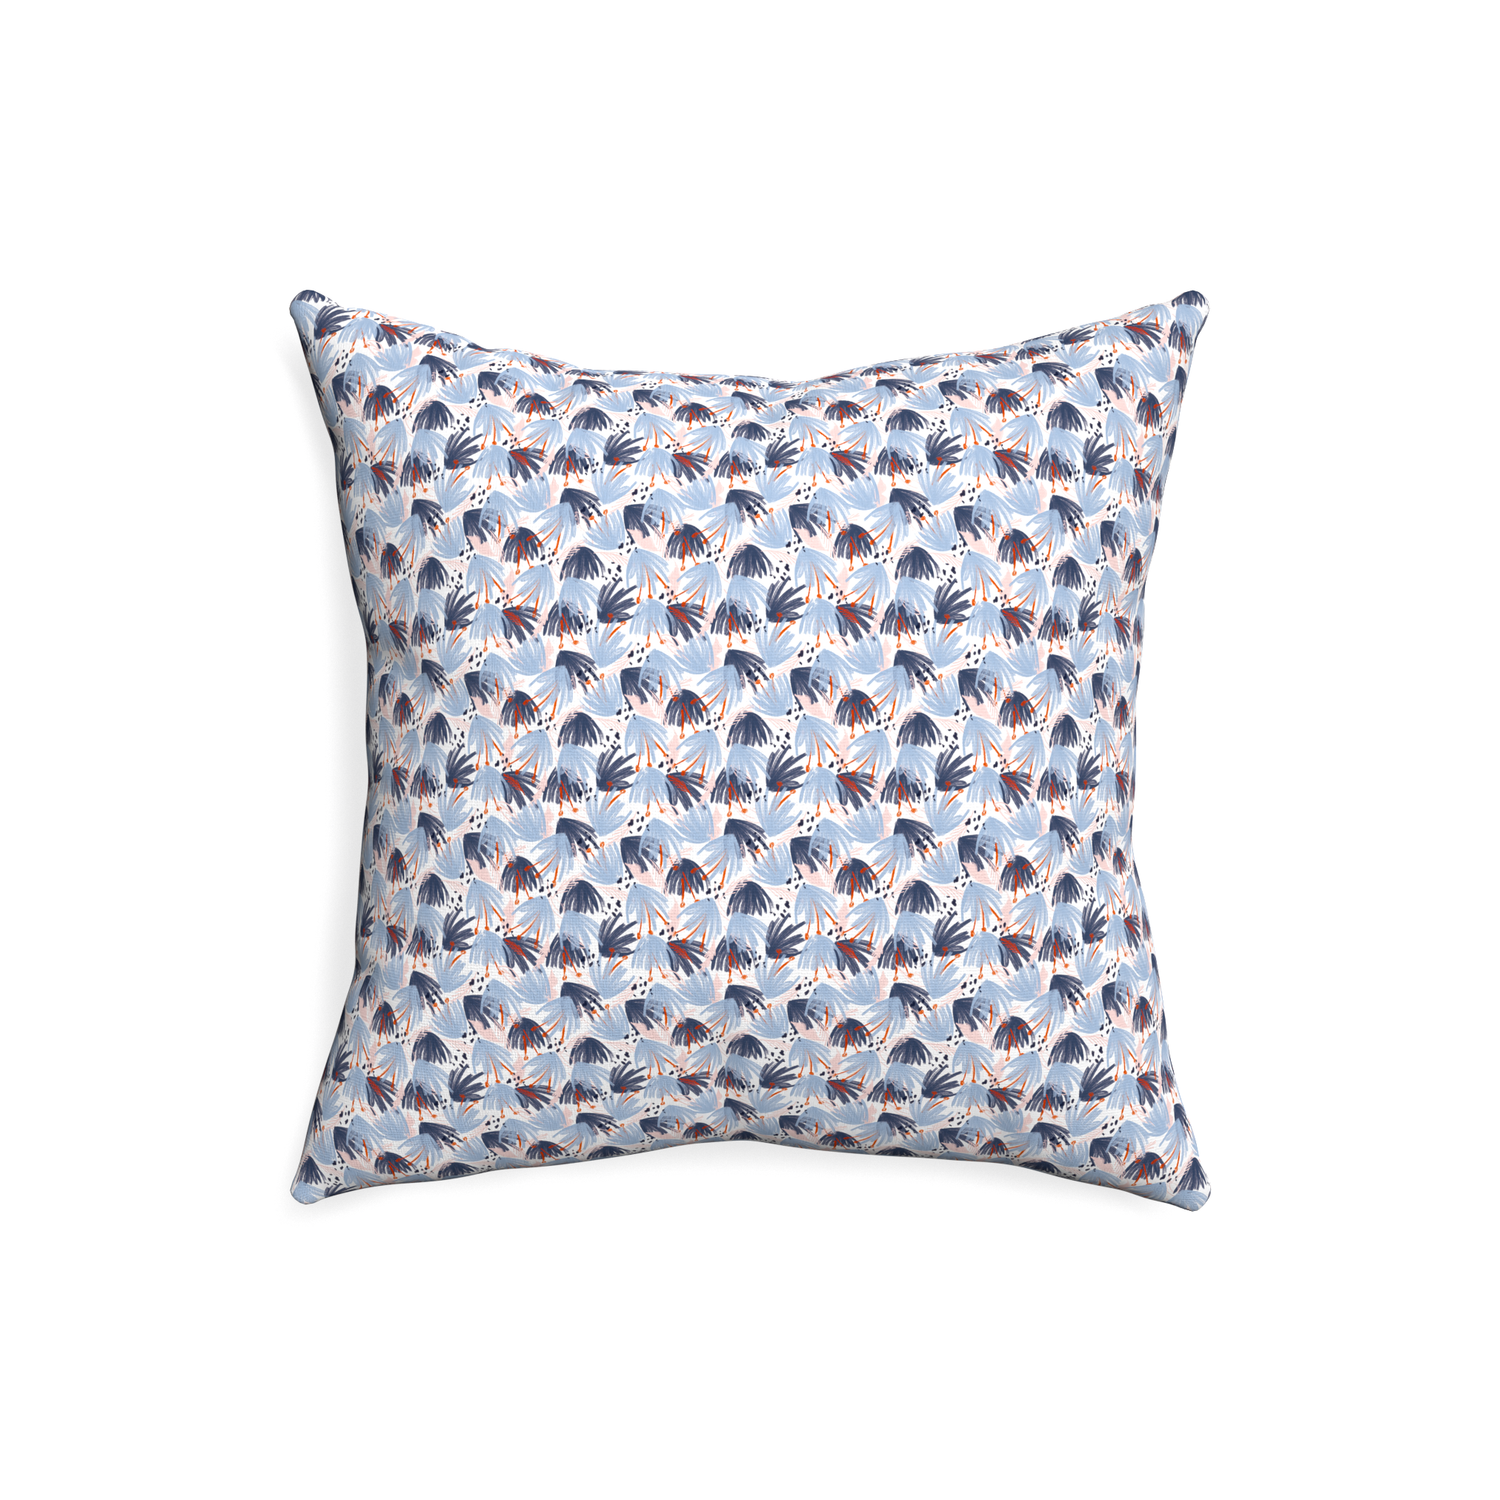 20-square eden blue custom pillow with none on white background